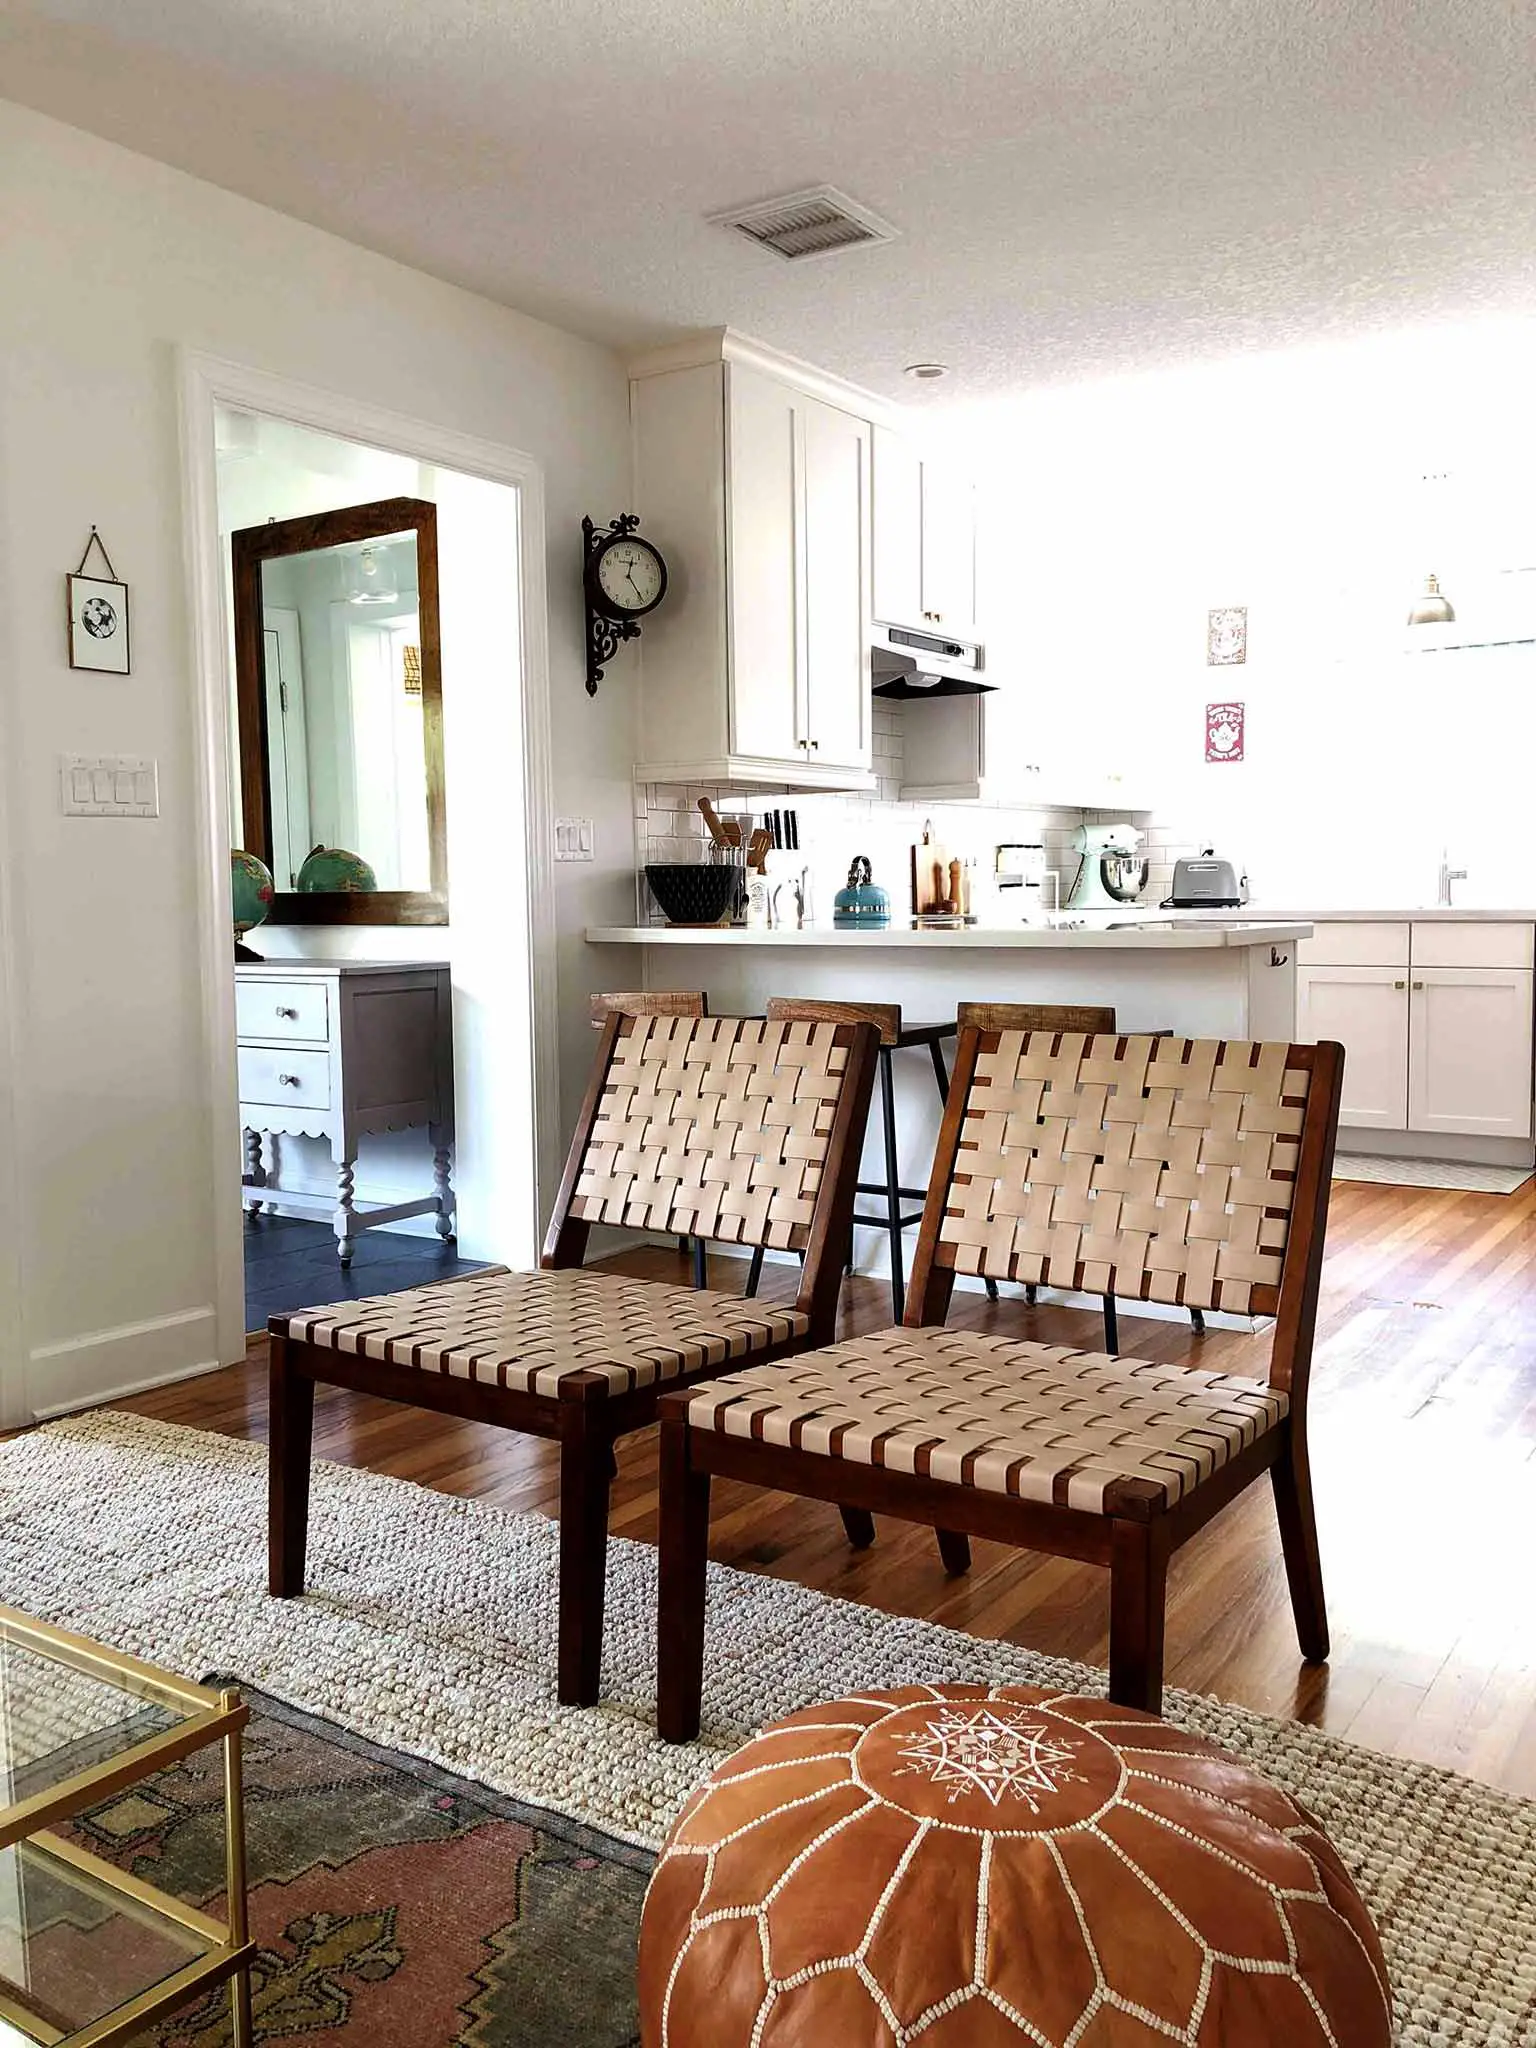 Layered and cozy living room - accent woven chairs Project 62 - That Homebird Life Blog